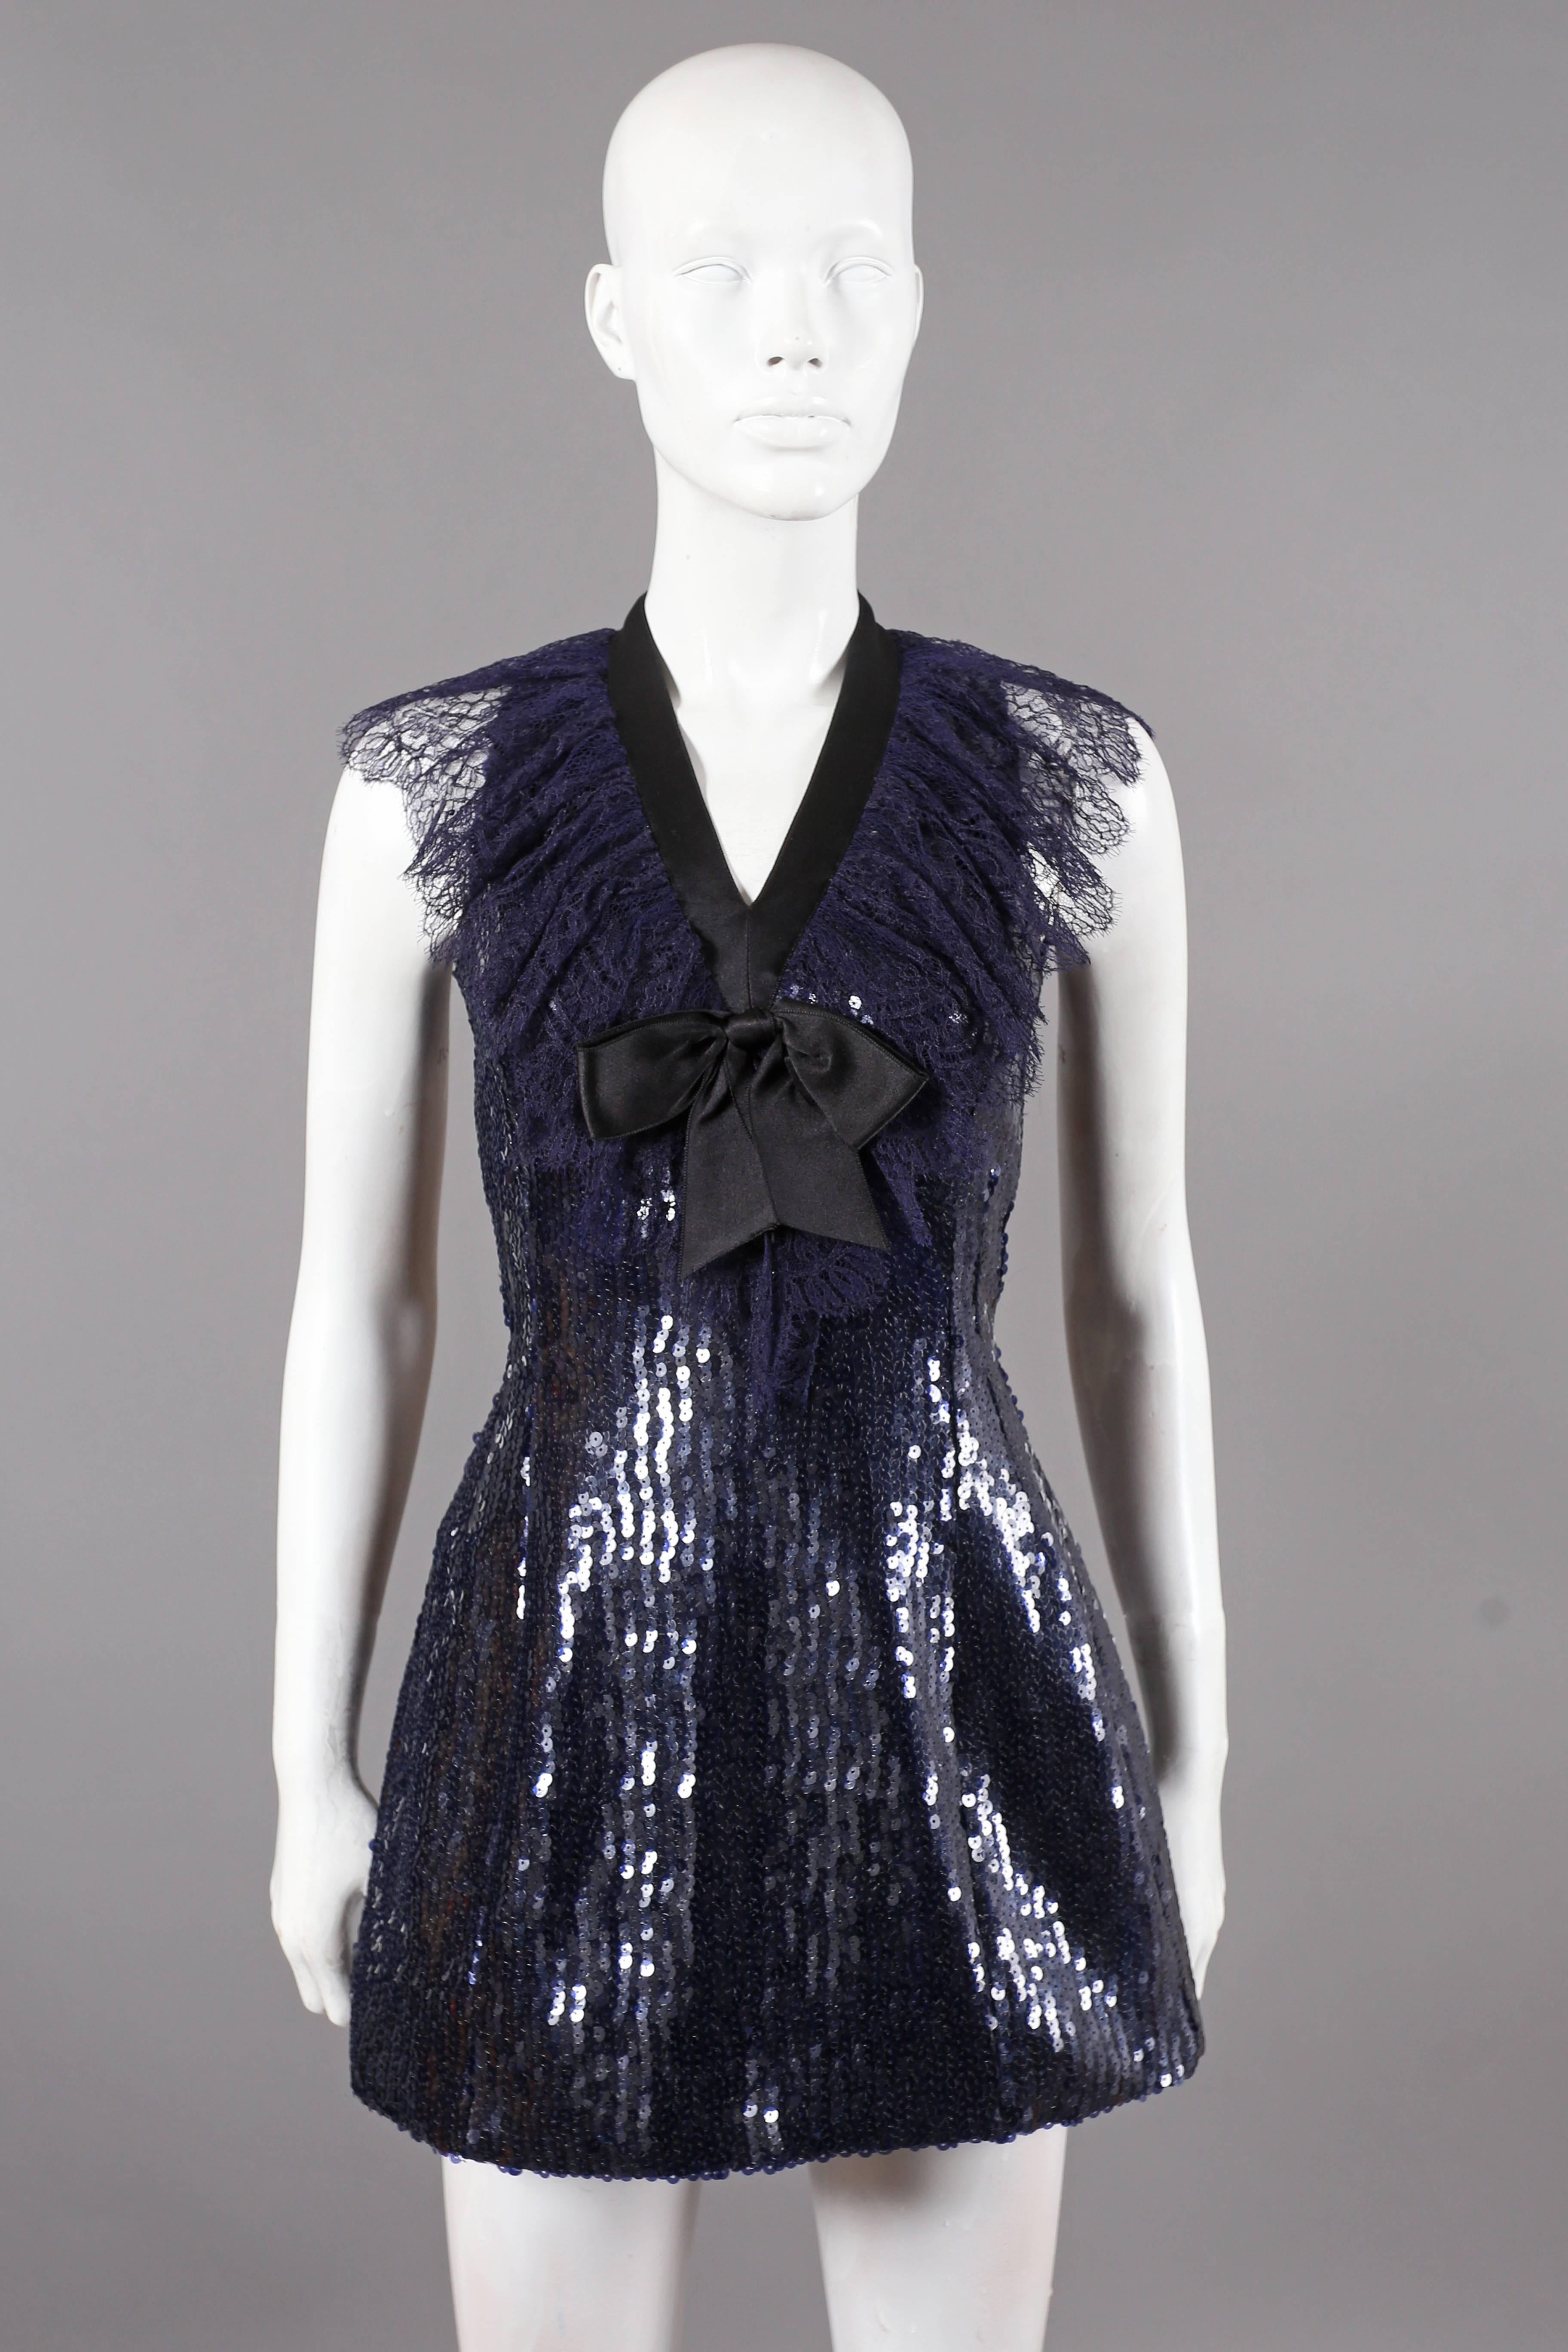 A fine and rare Chanel navy blue mini dress, circa 1987. The dress features black satin bow, Chantilly lace collar, two gold-tone clover leaf buttons and invisible zipper at rear. 

EU 36  UK 8  Small 

Bust 32